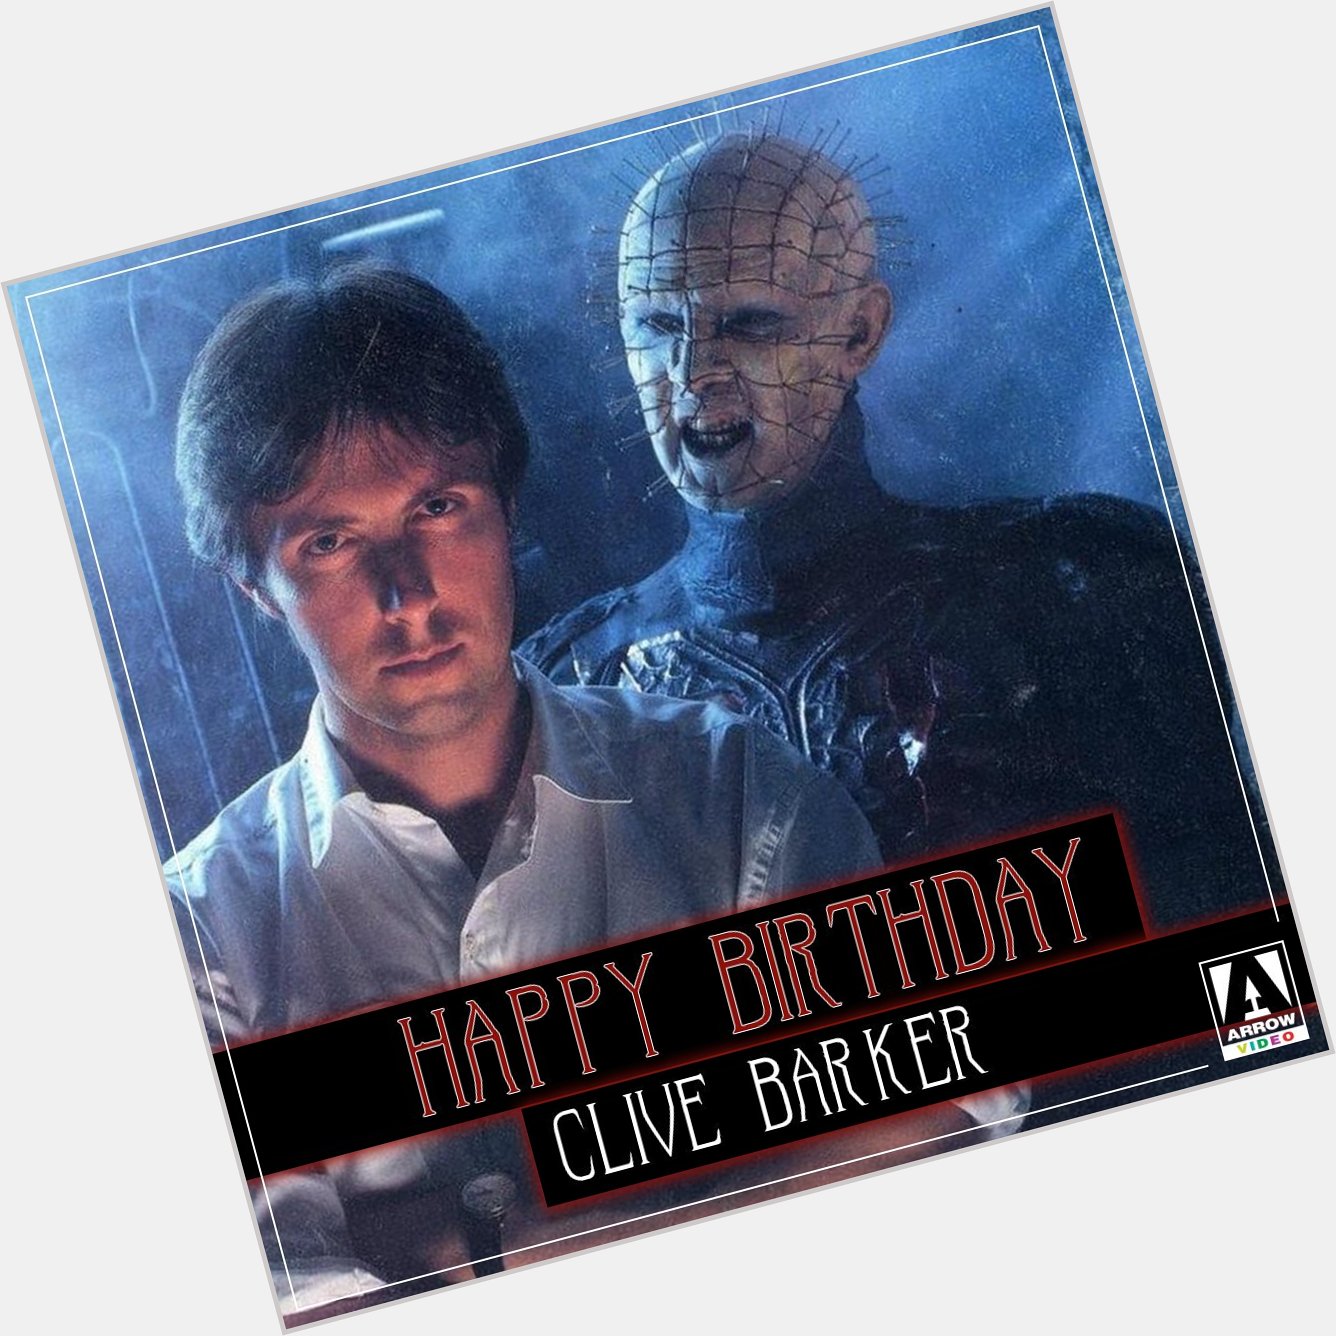 Director, painter and one hell of a writer. Happy Birthday our favourite hellraiser Clive Barker 